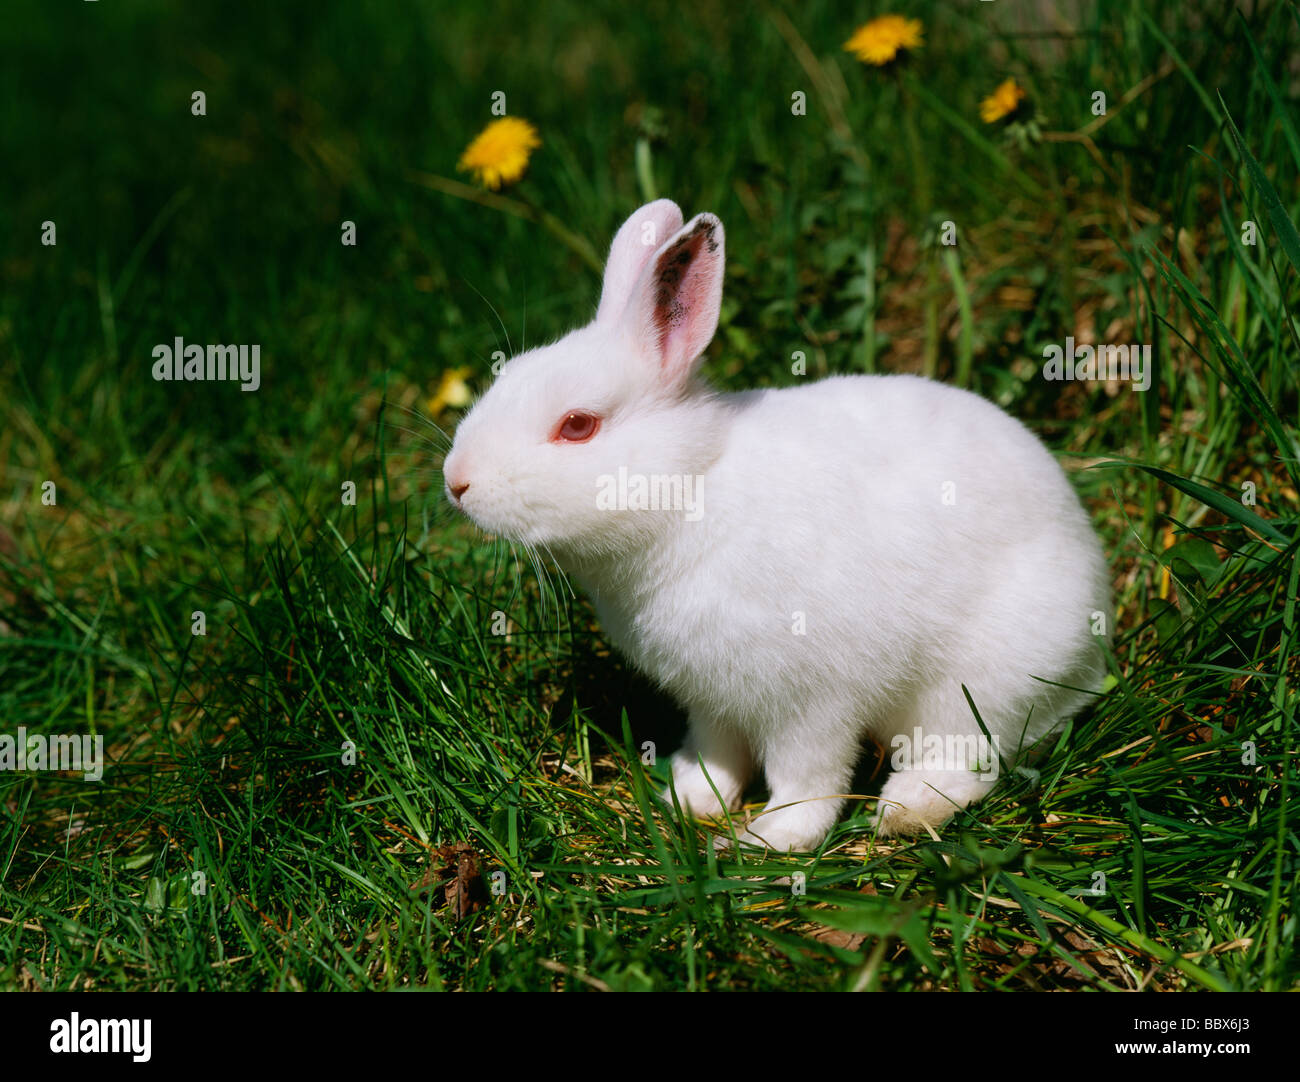 Rabbit on grass side view Stock Photo